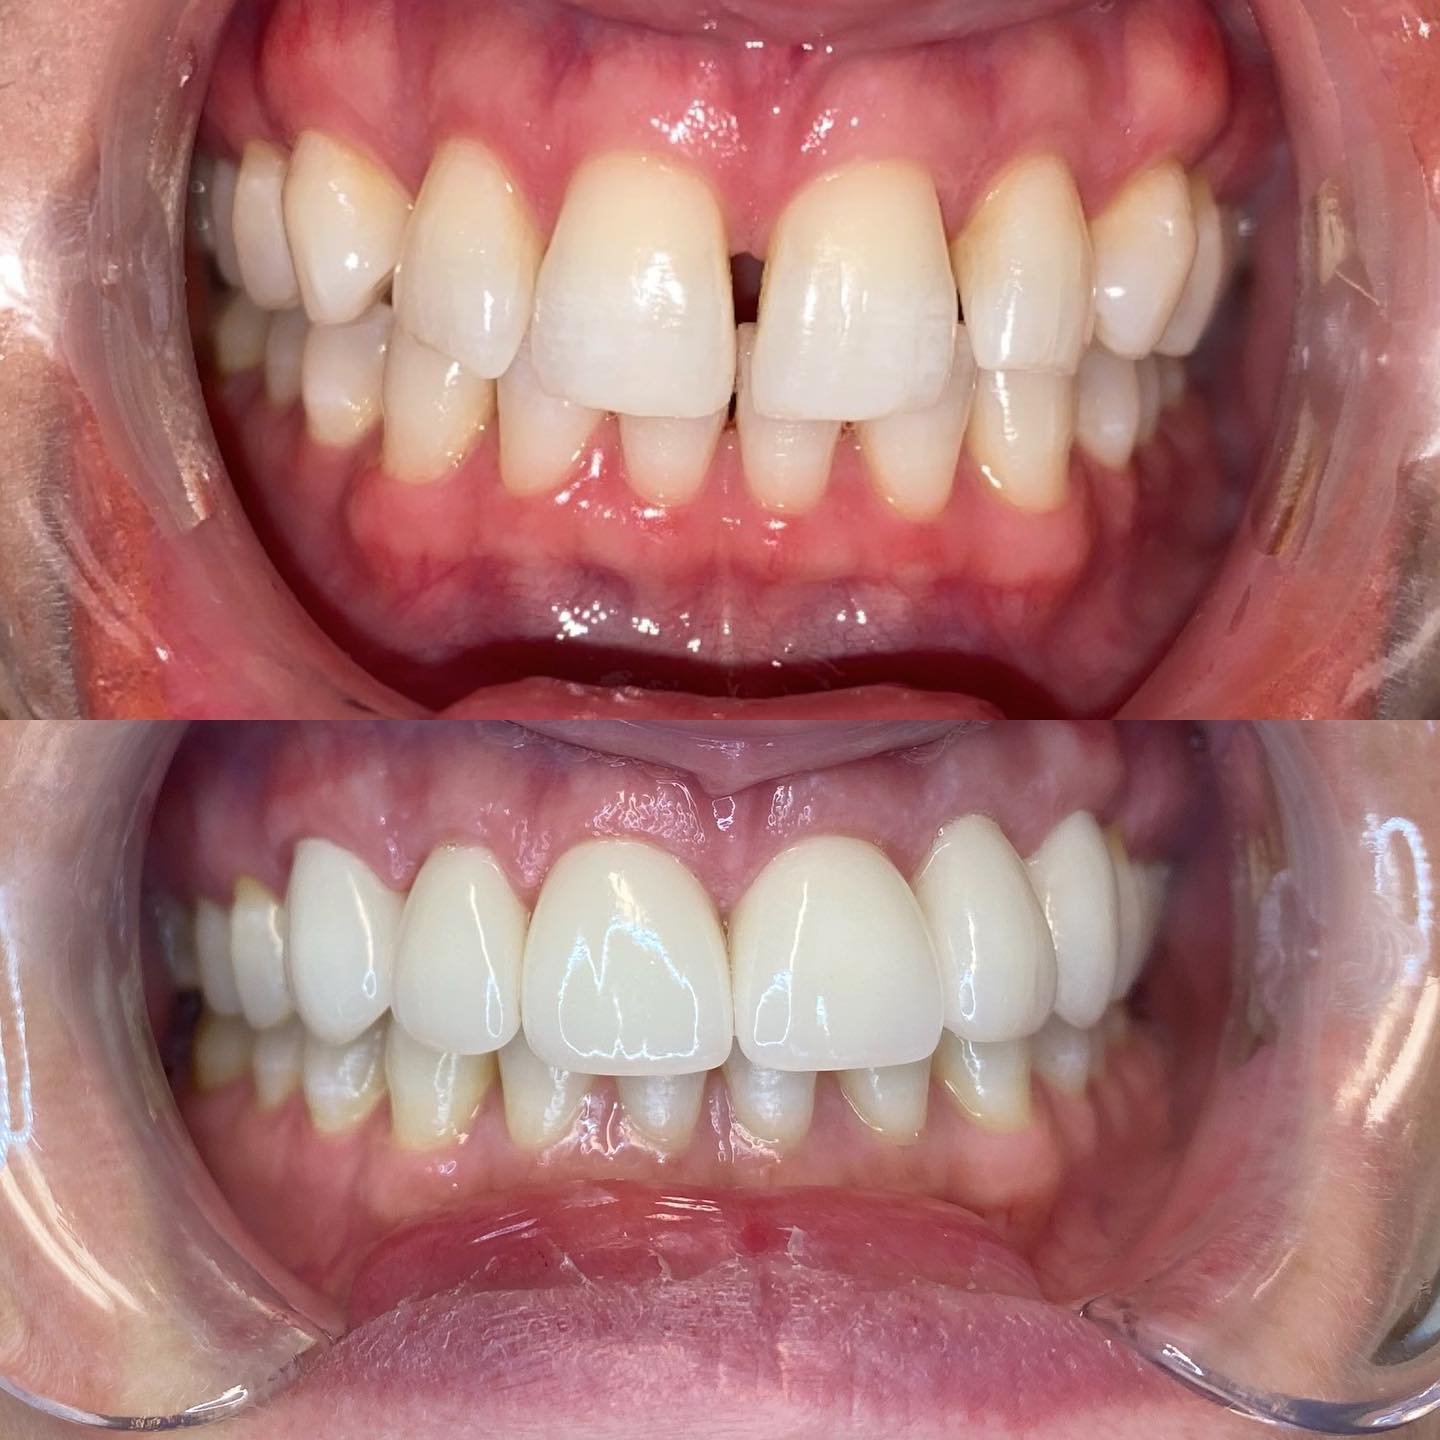 Happy Tuesday!! We love starting our week with beautiful transformations like this one! Call and schedule your consultation for your smile today! — at Auburn Dental Spa